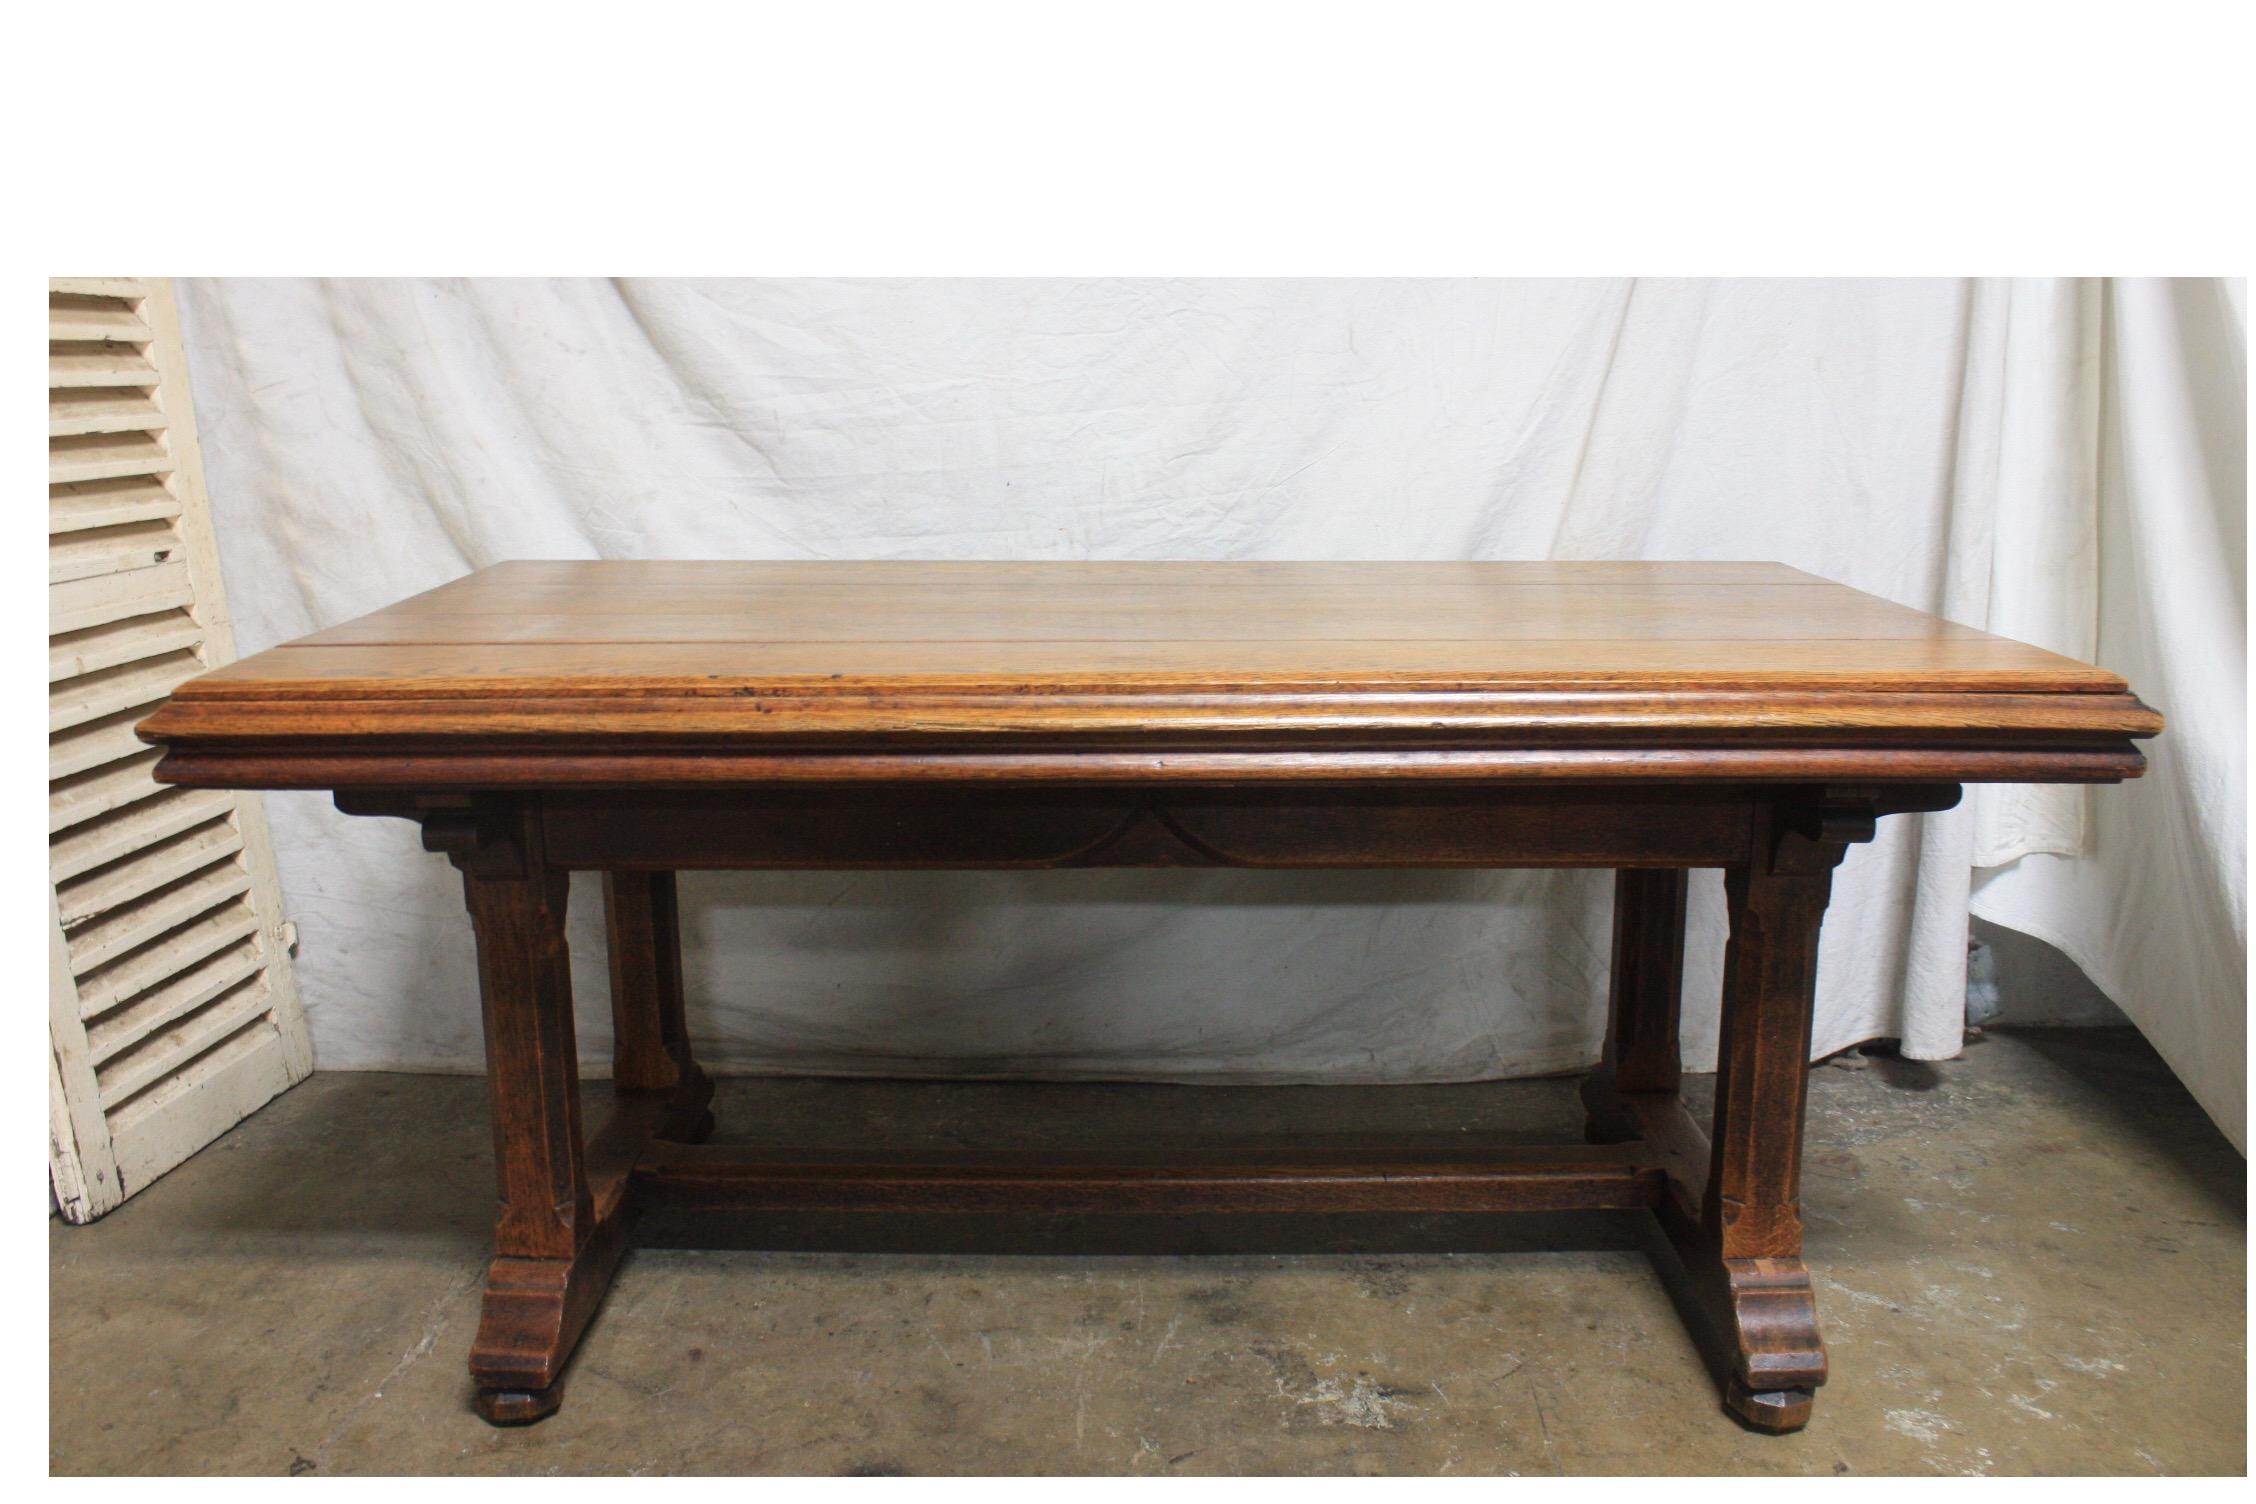 Late 19th century French table desk.